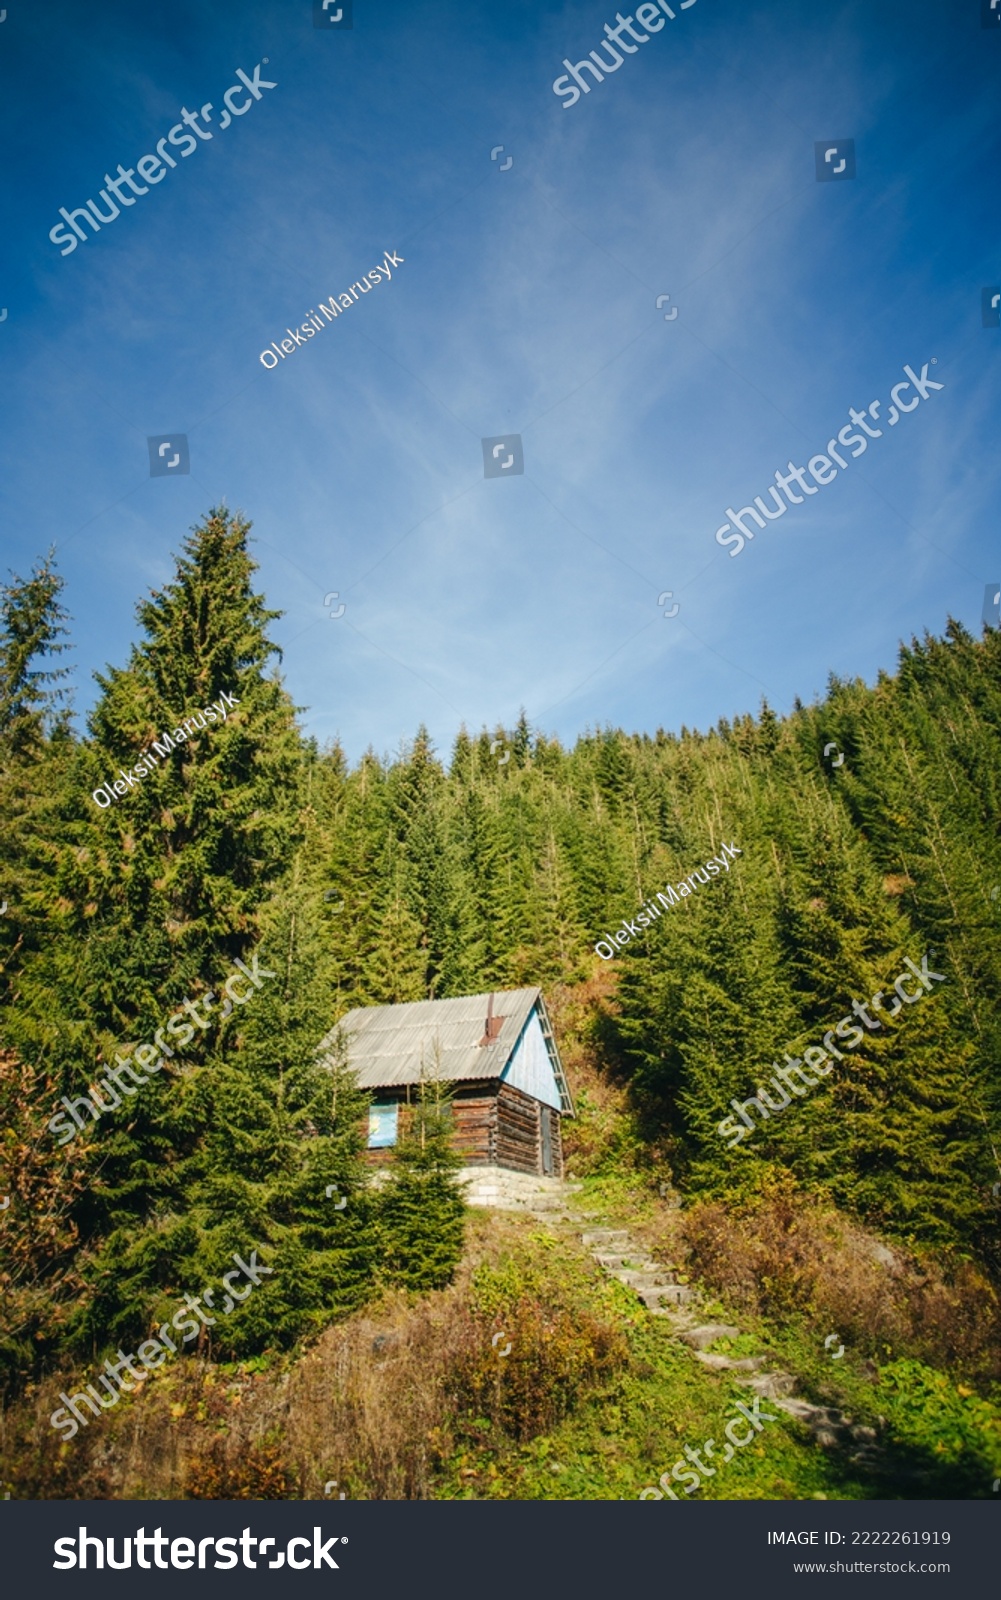 A lonely house in the autumn mountains.
A beautiful forester's house in the mountains #2222261919